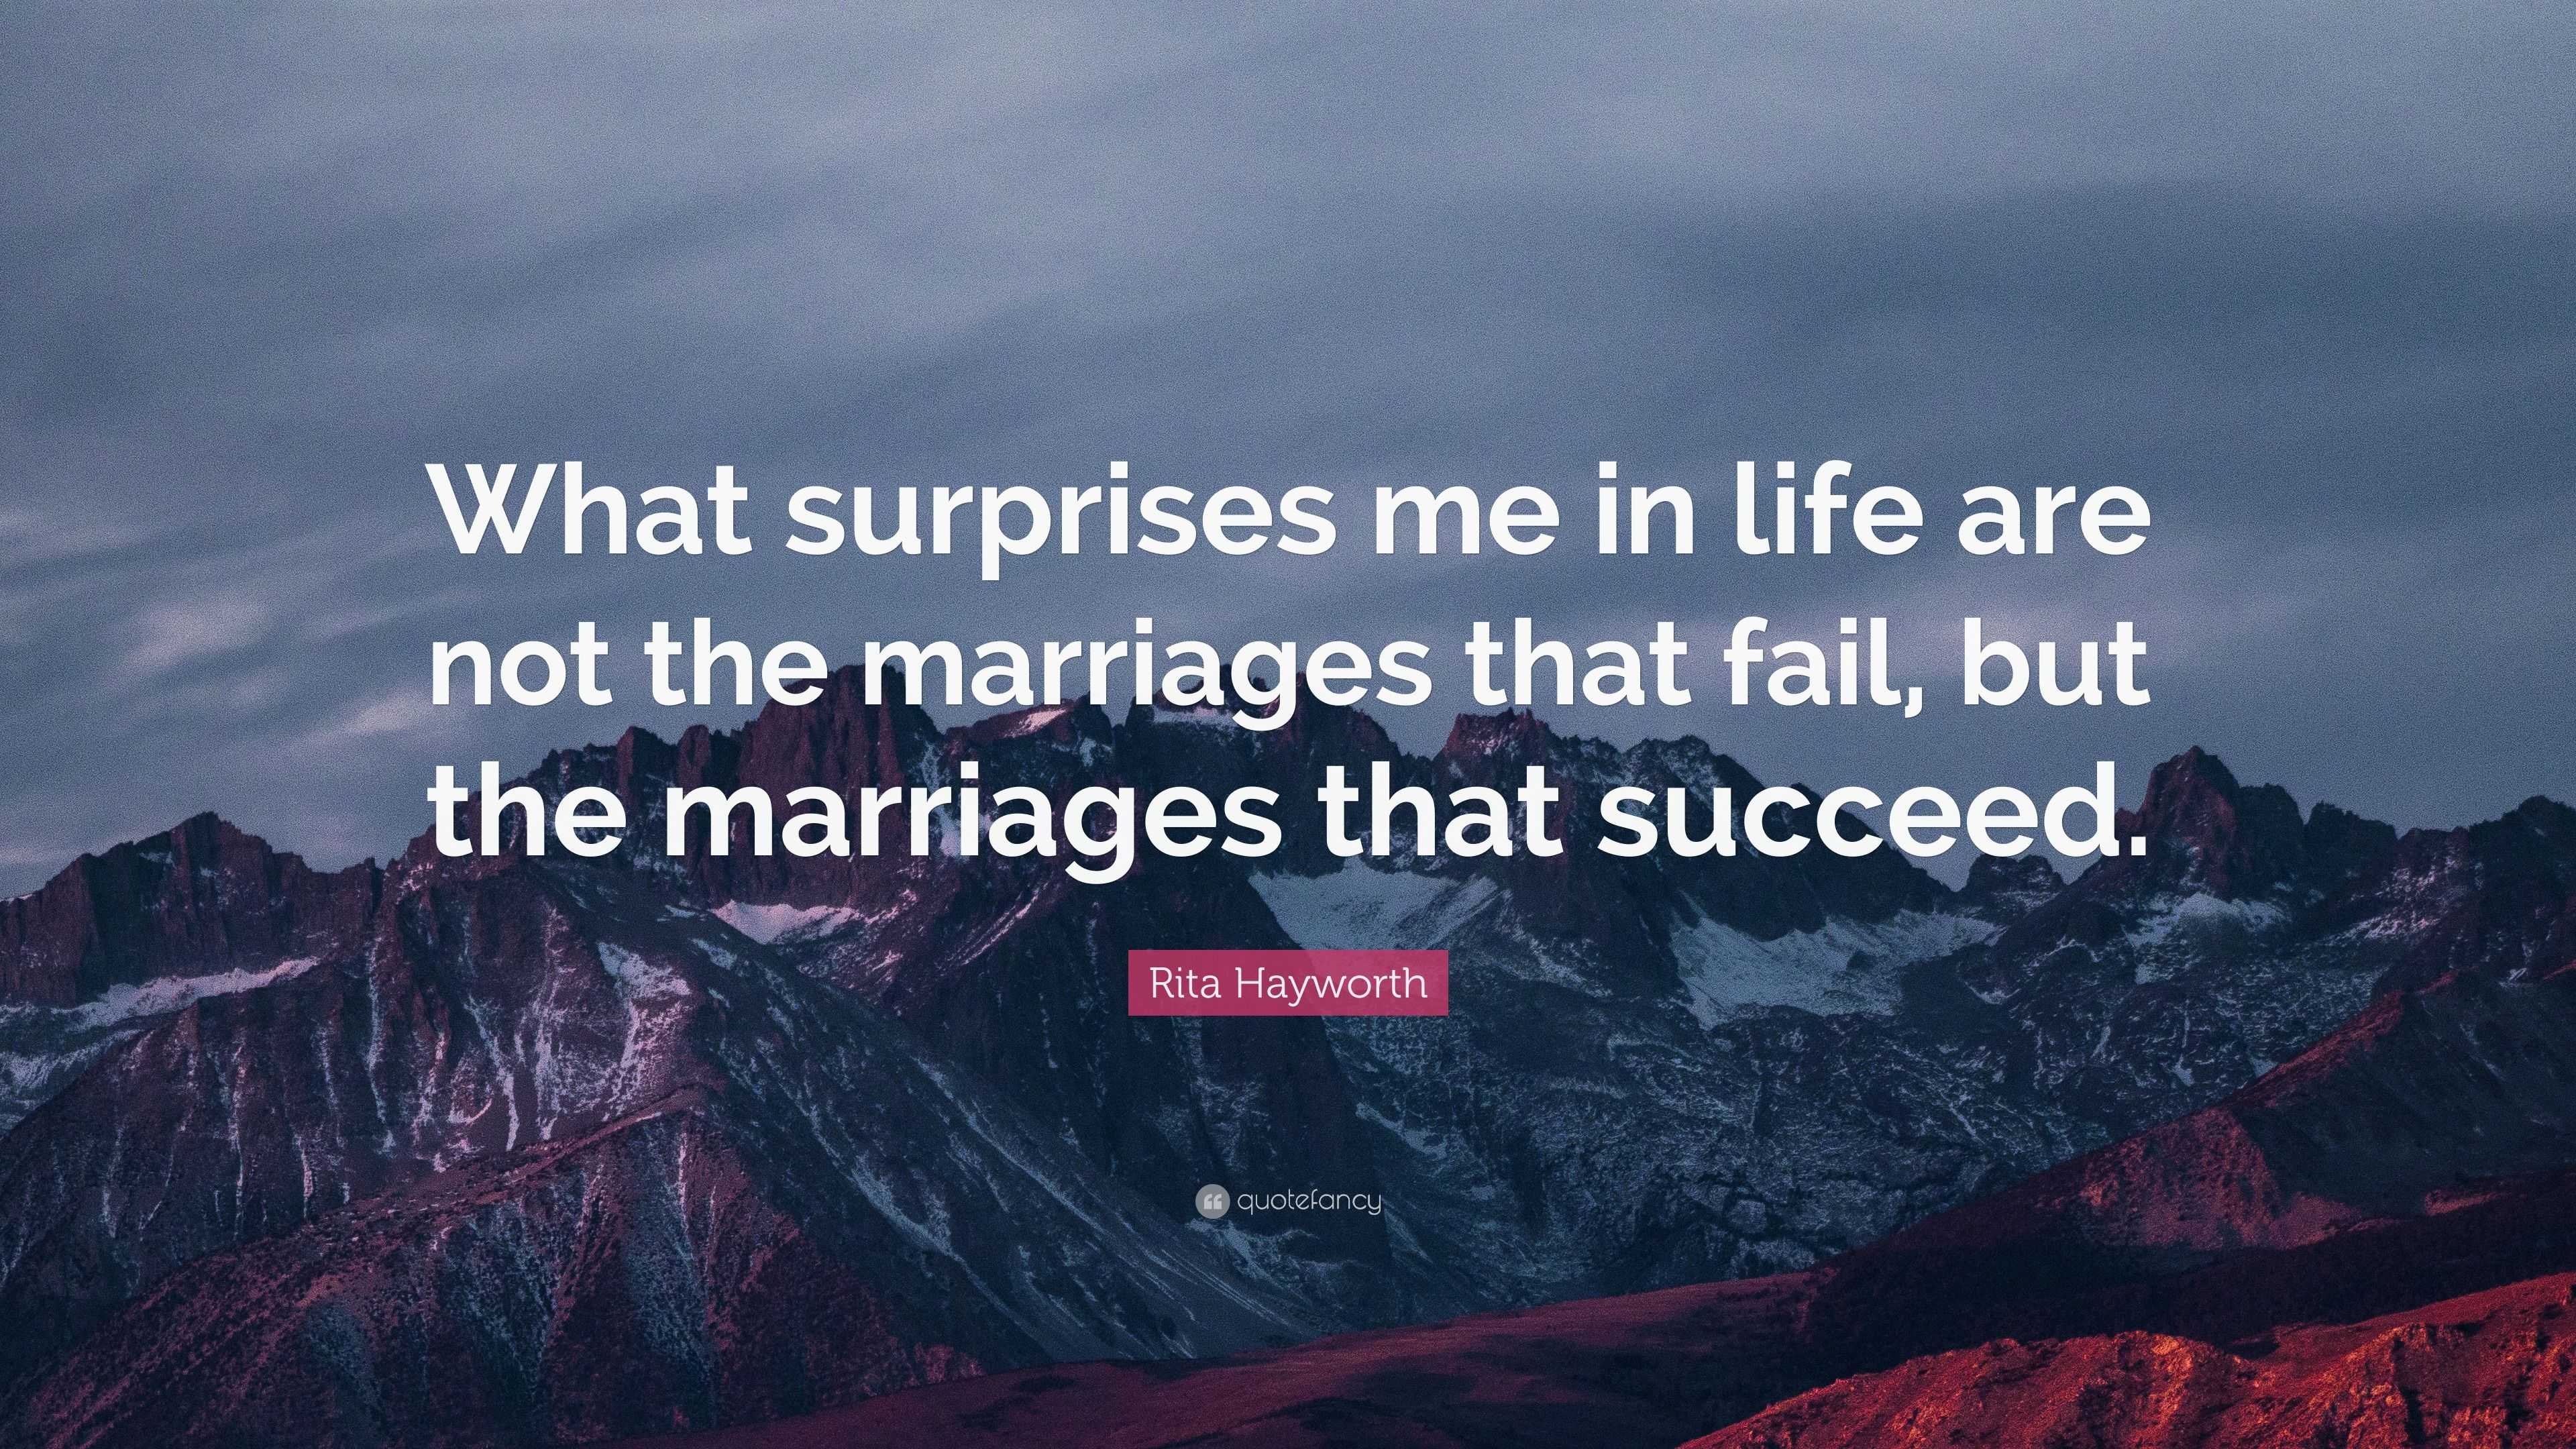 Rita Hayworth Quote: “What surprises me in life are not the marriages ...